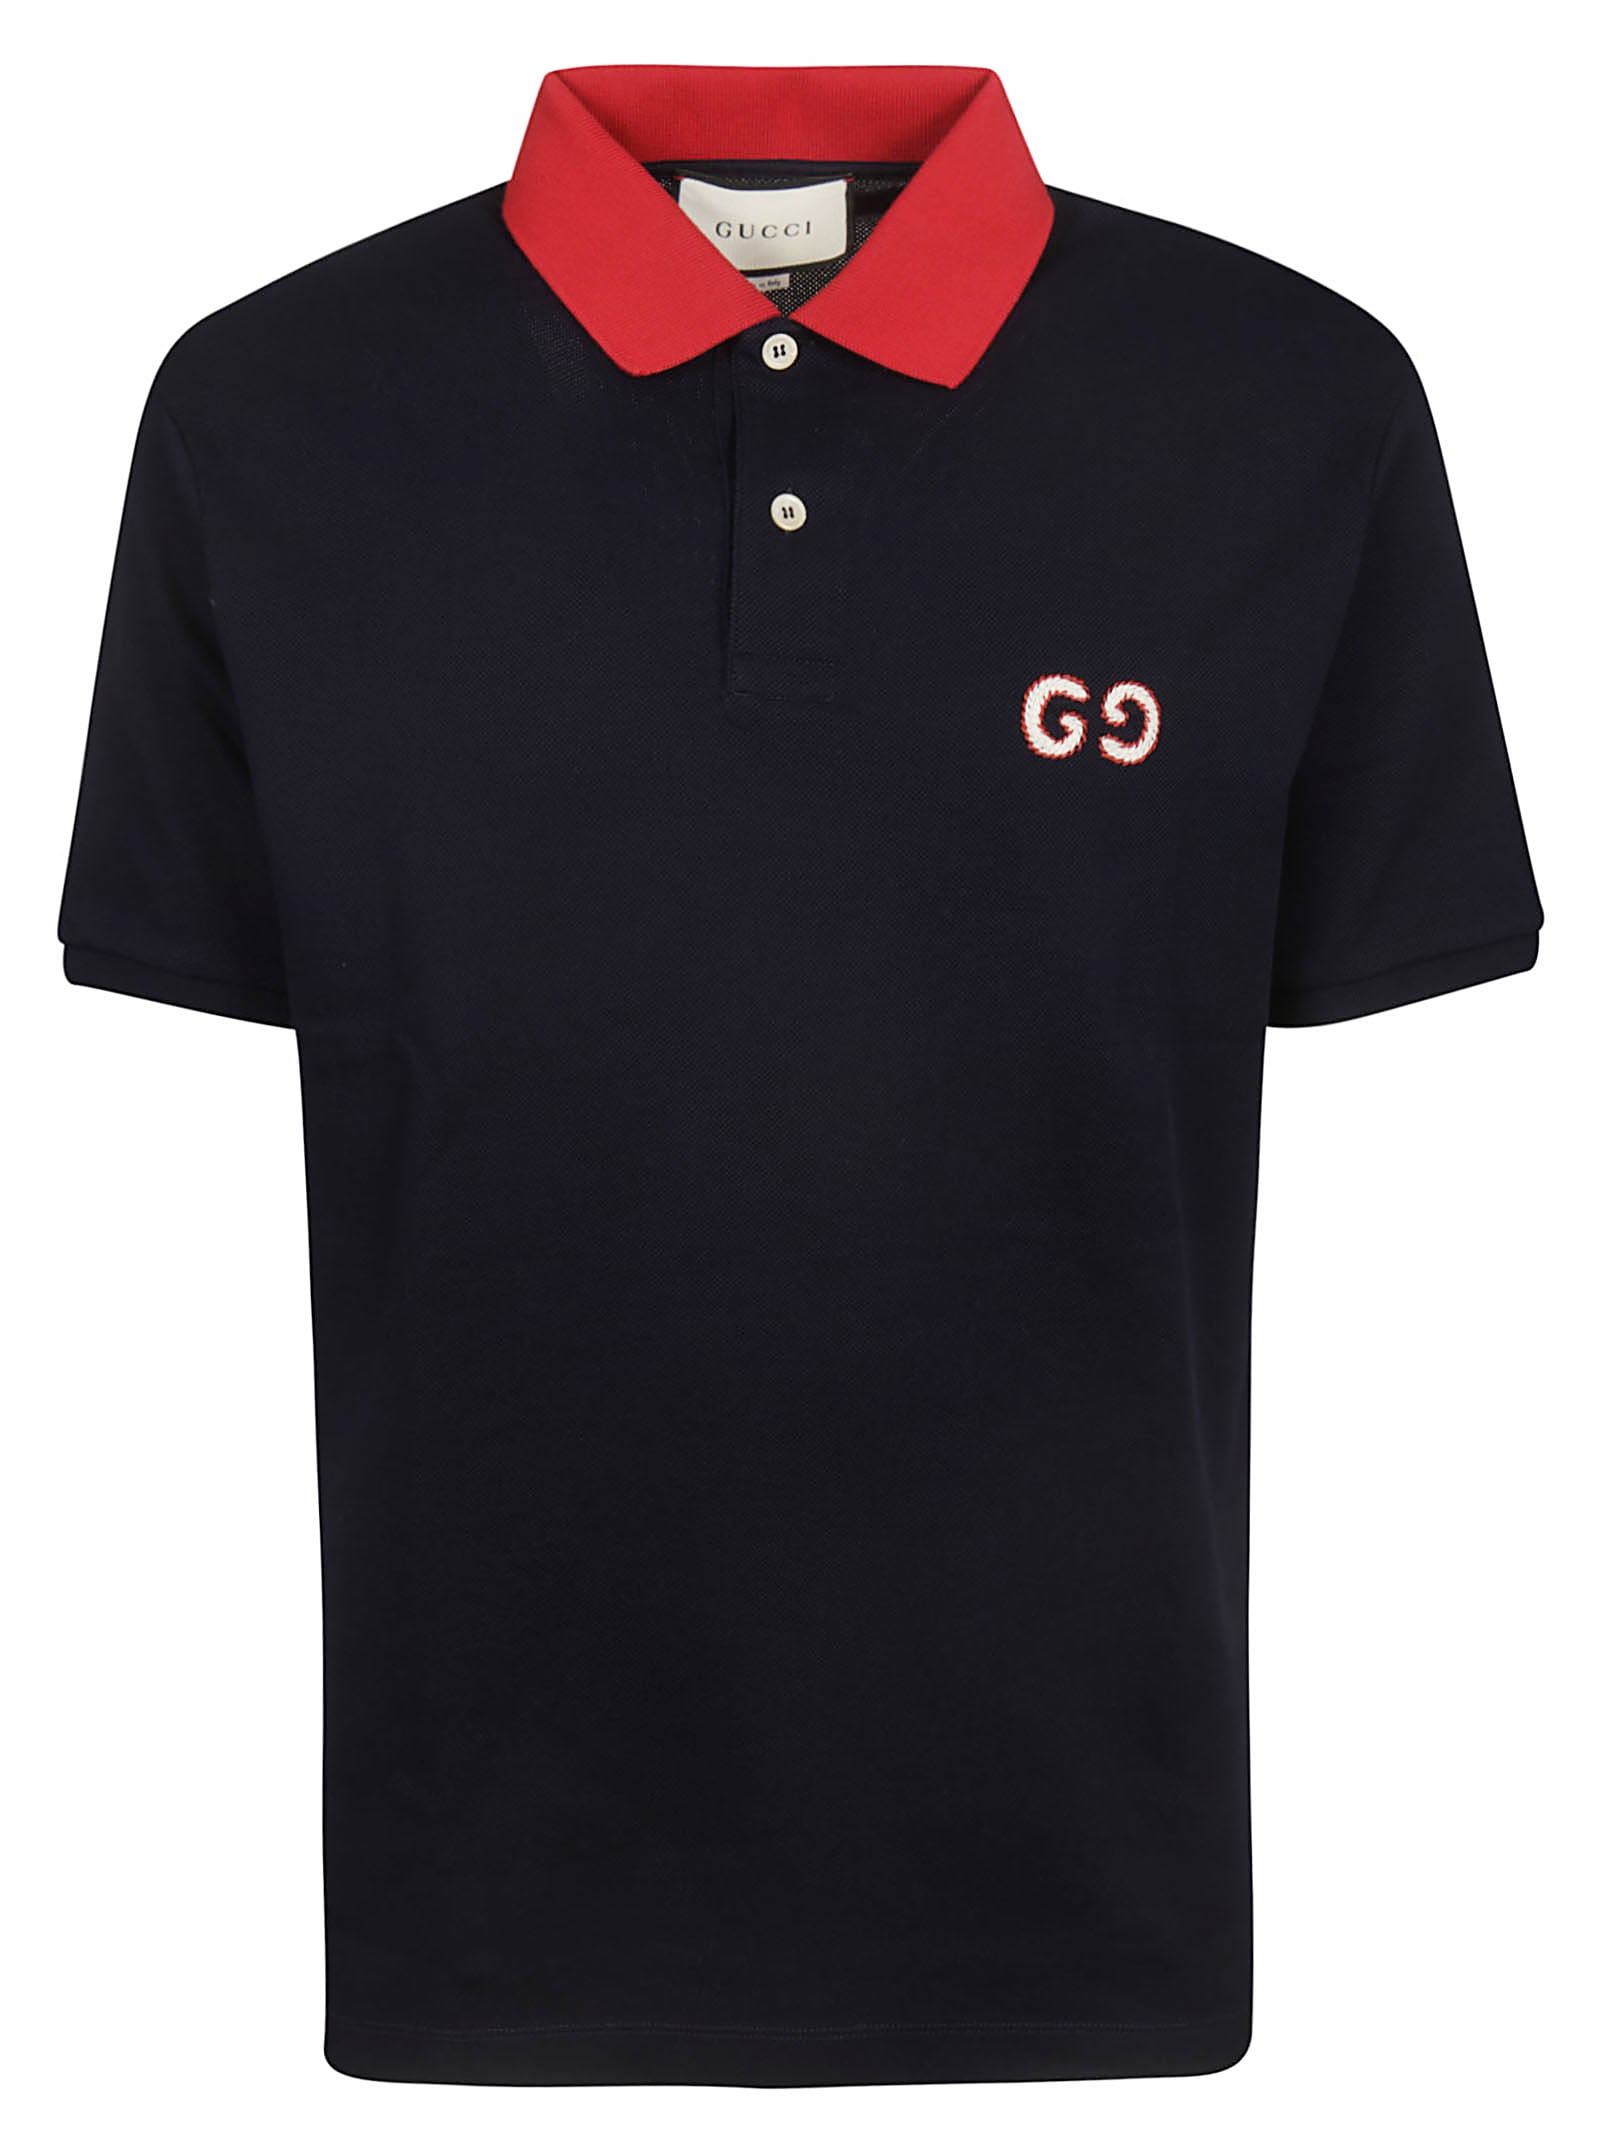 Gucci Gucci Gg Embroidery Polo Shirt - Navy - 11001350 | italist